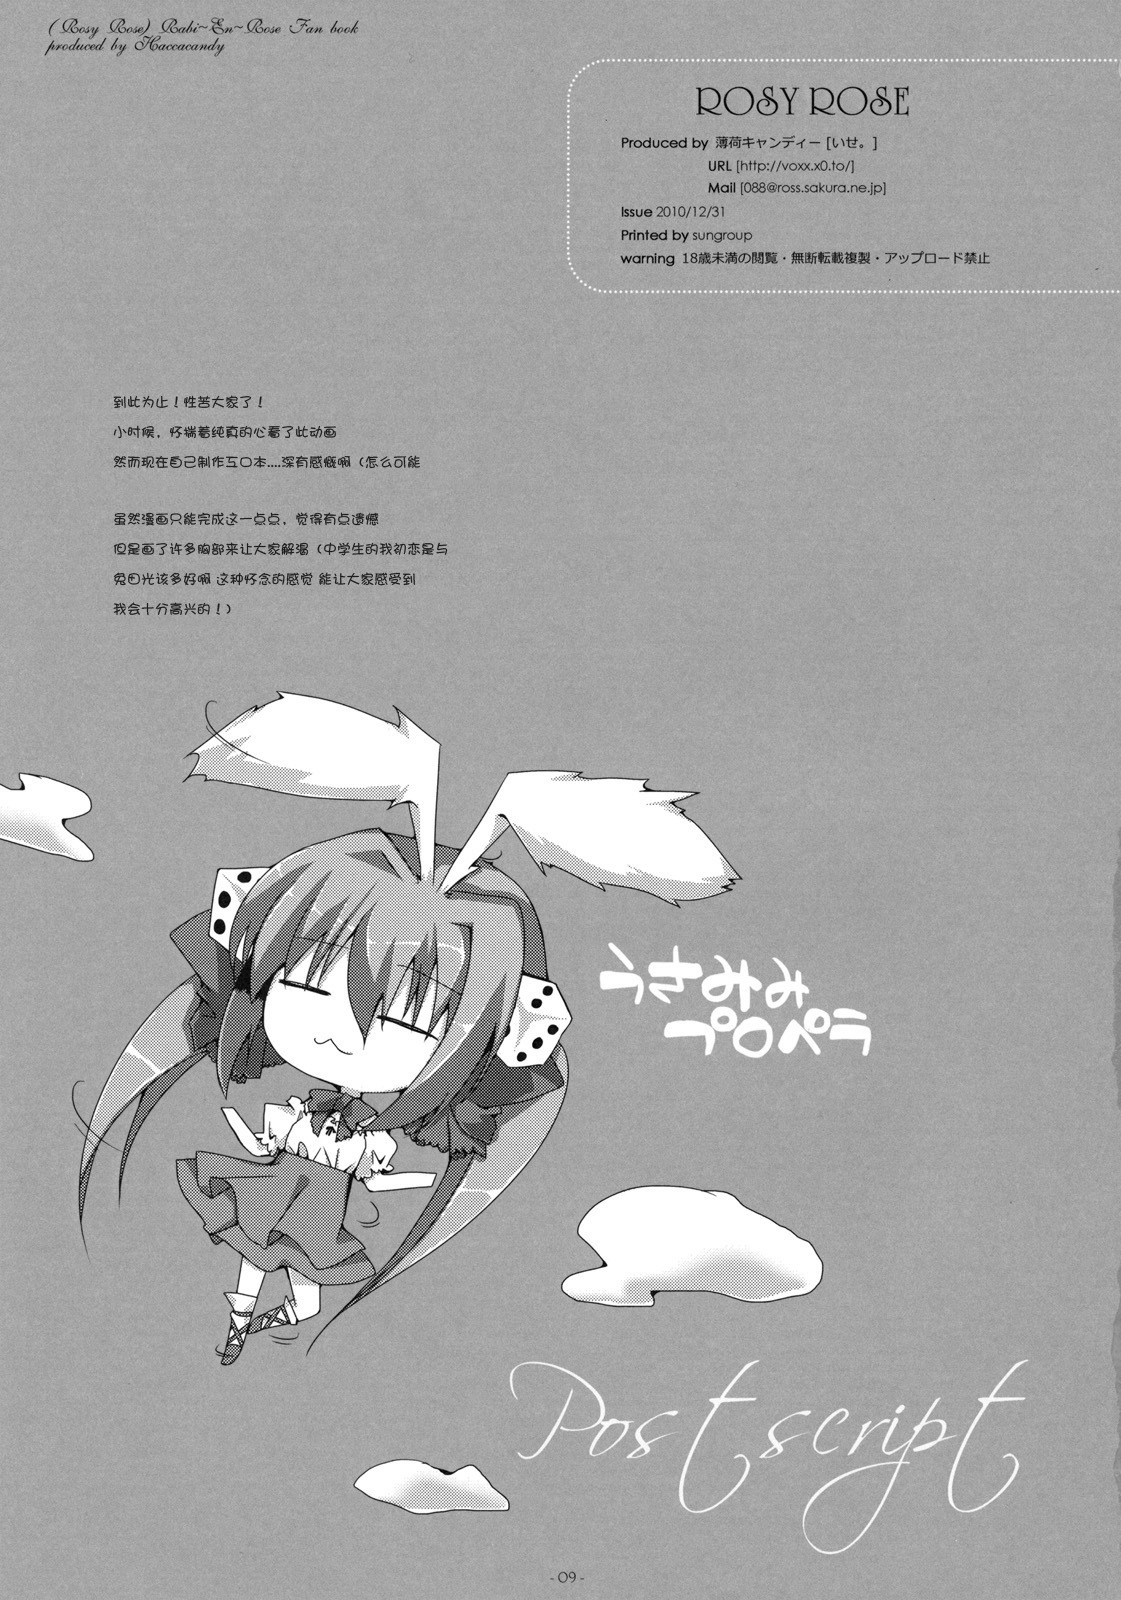 (C79) [Hacca Candy (Ise.)] RosyRose (Di Gi Charat) [Chinese] [萌舞の里组汉化] page 10 full